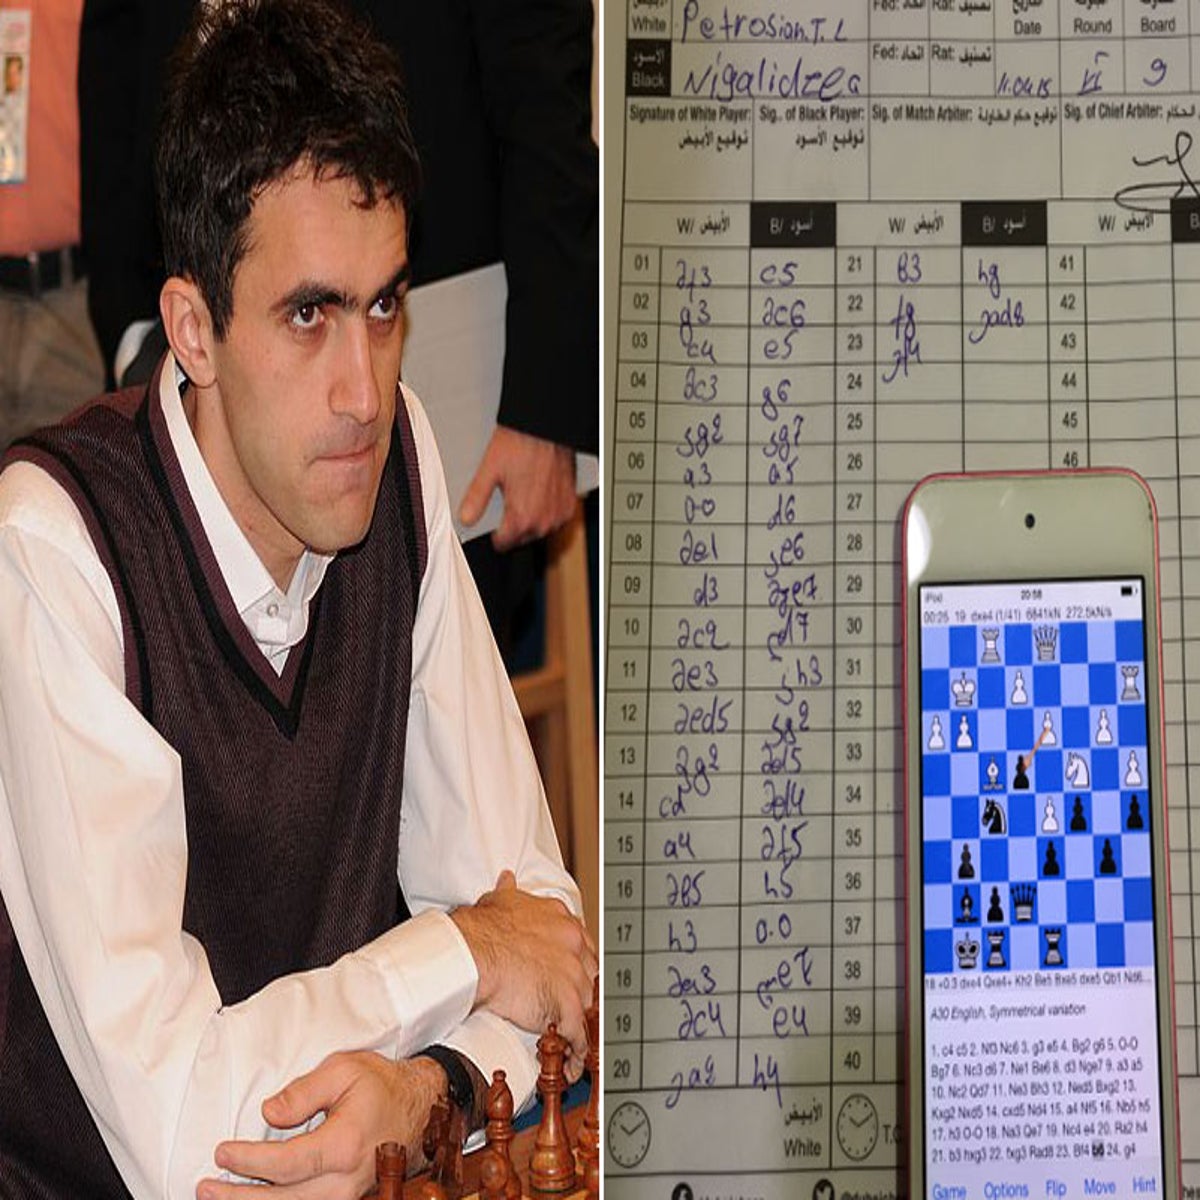 Chess player caught cheating with phone during tournament Europe news